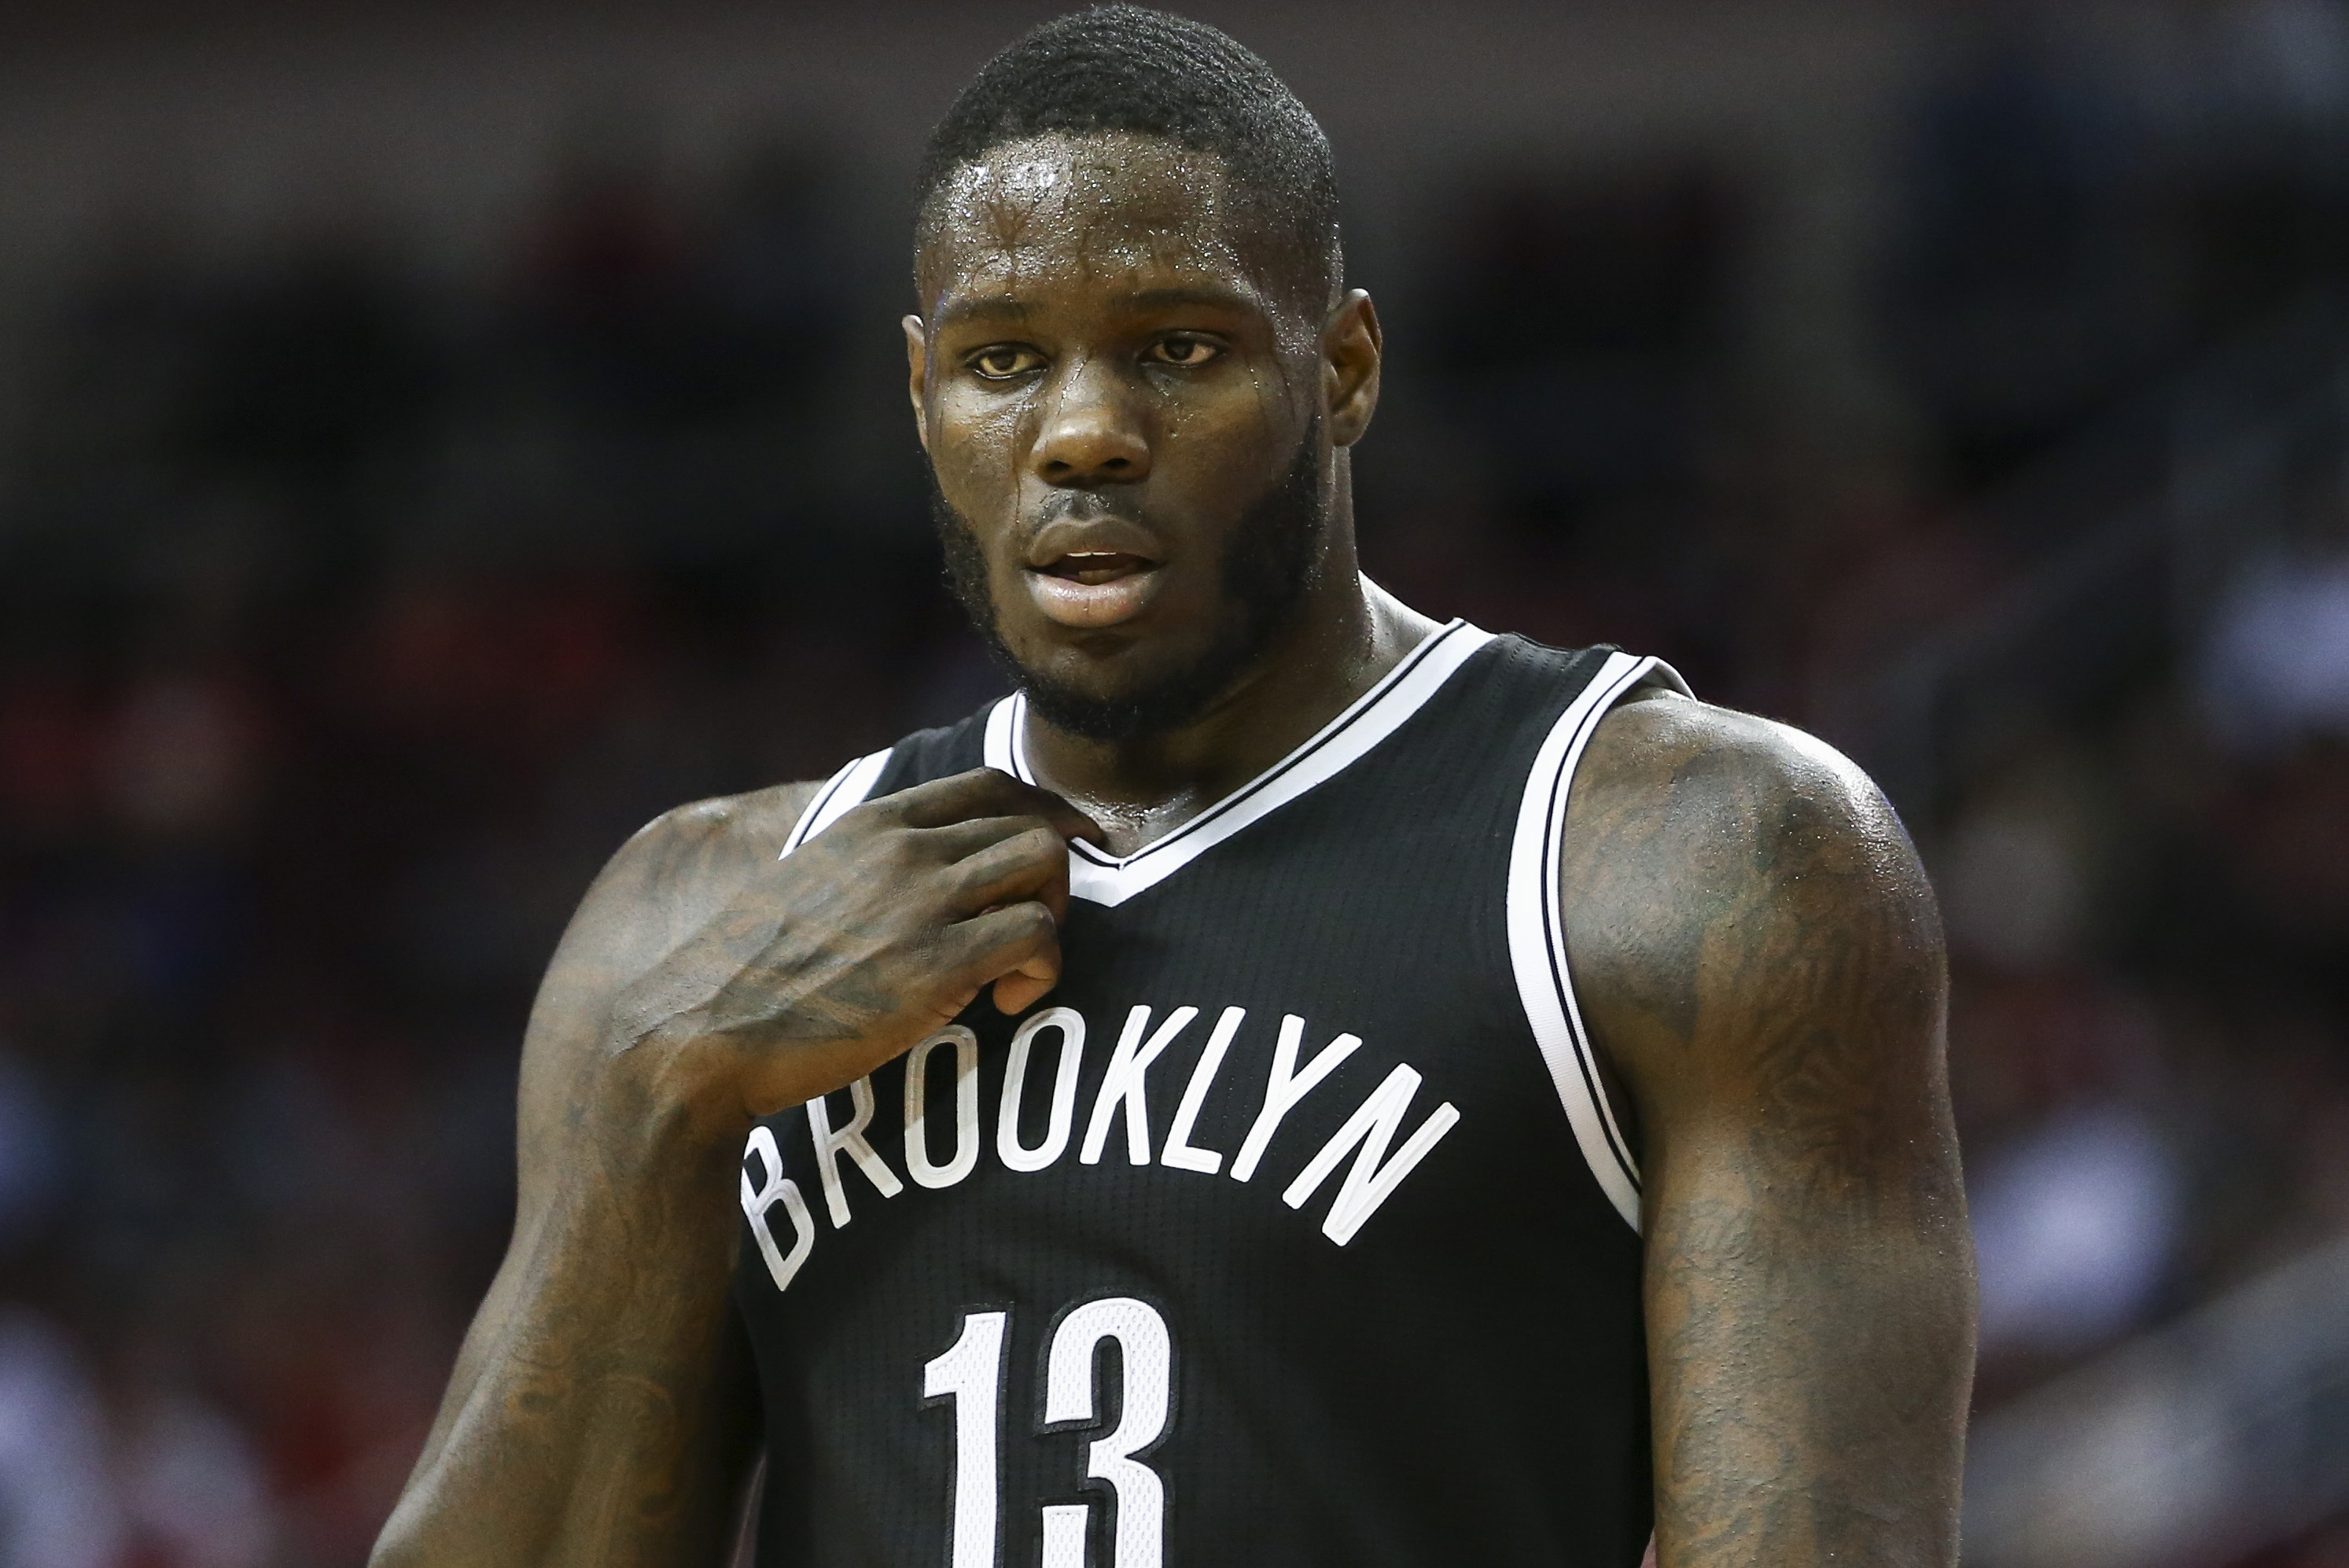 Anthony Bennett's Game Flopped, But He Walked Away With Millions - FanBuzz